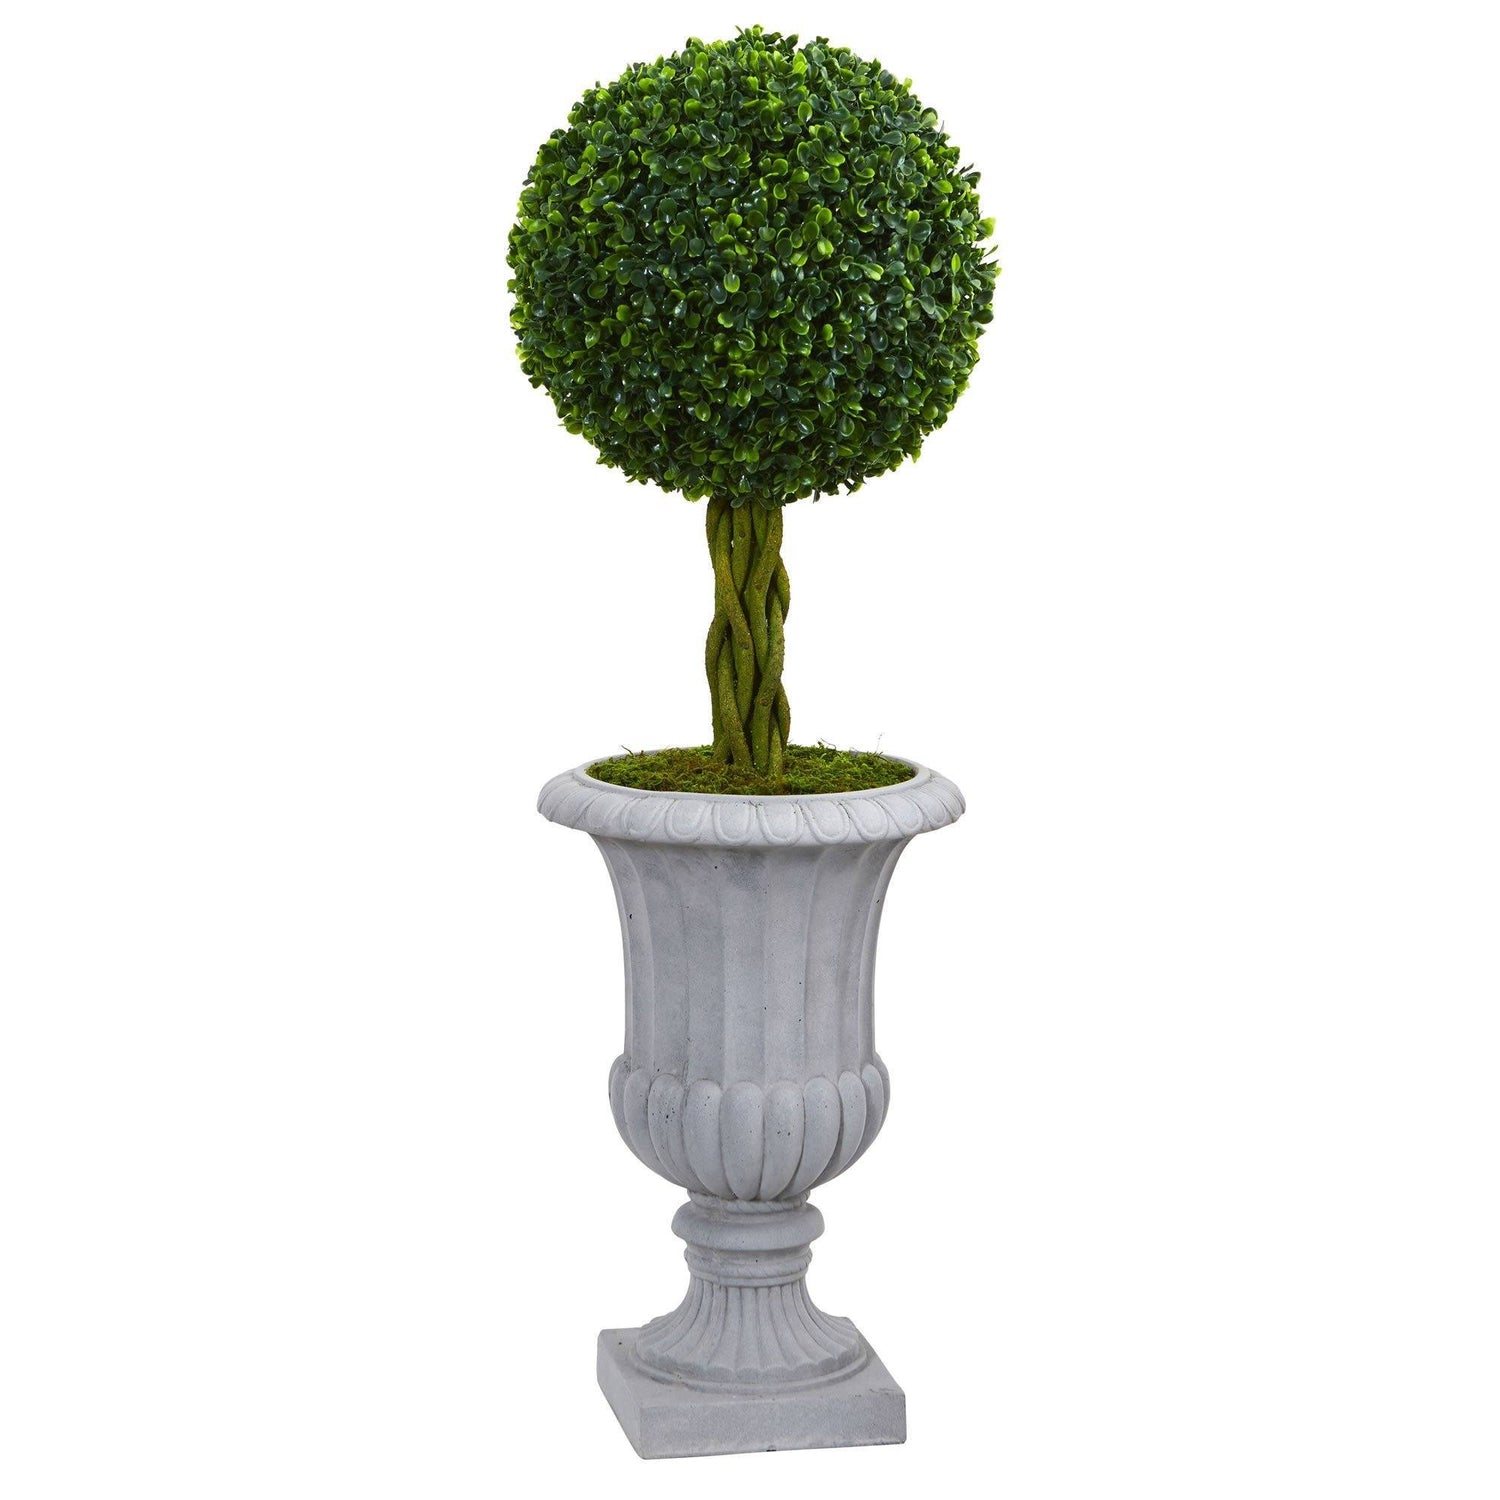 3’ Braided Boxwood Topiary Artificial Tree in Gray Urn UV Resistant (Indoor/Outdoor)